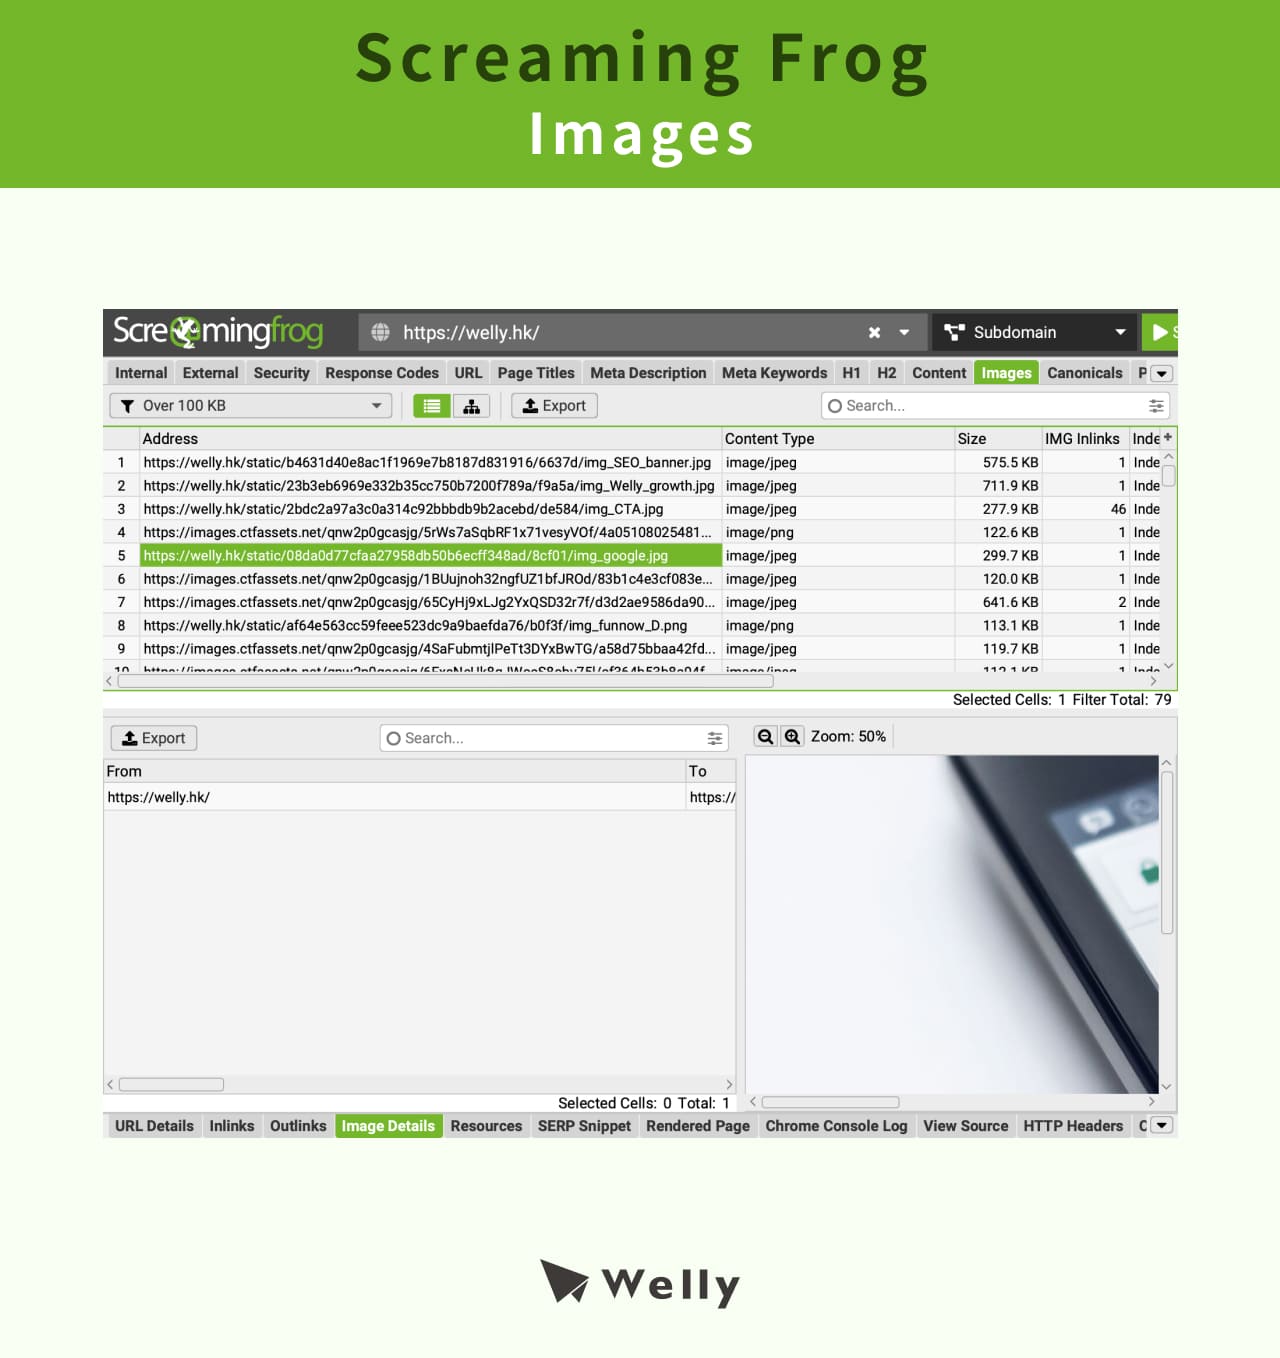 Screaming Frog Images